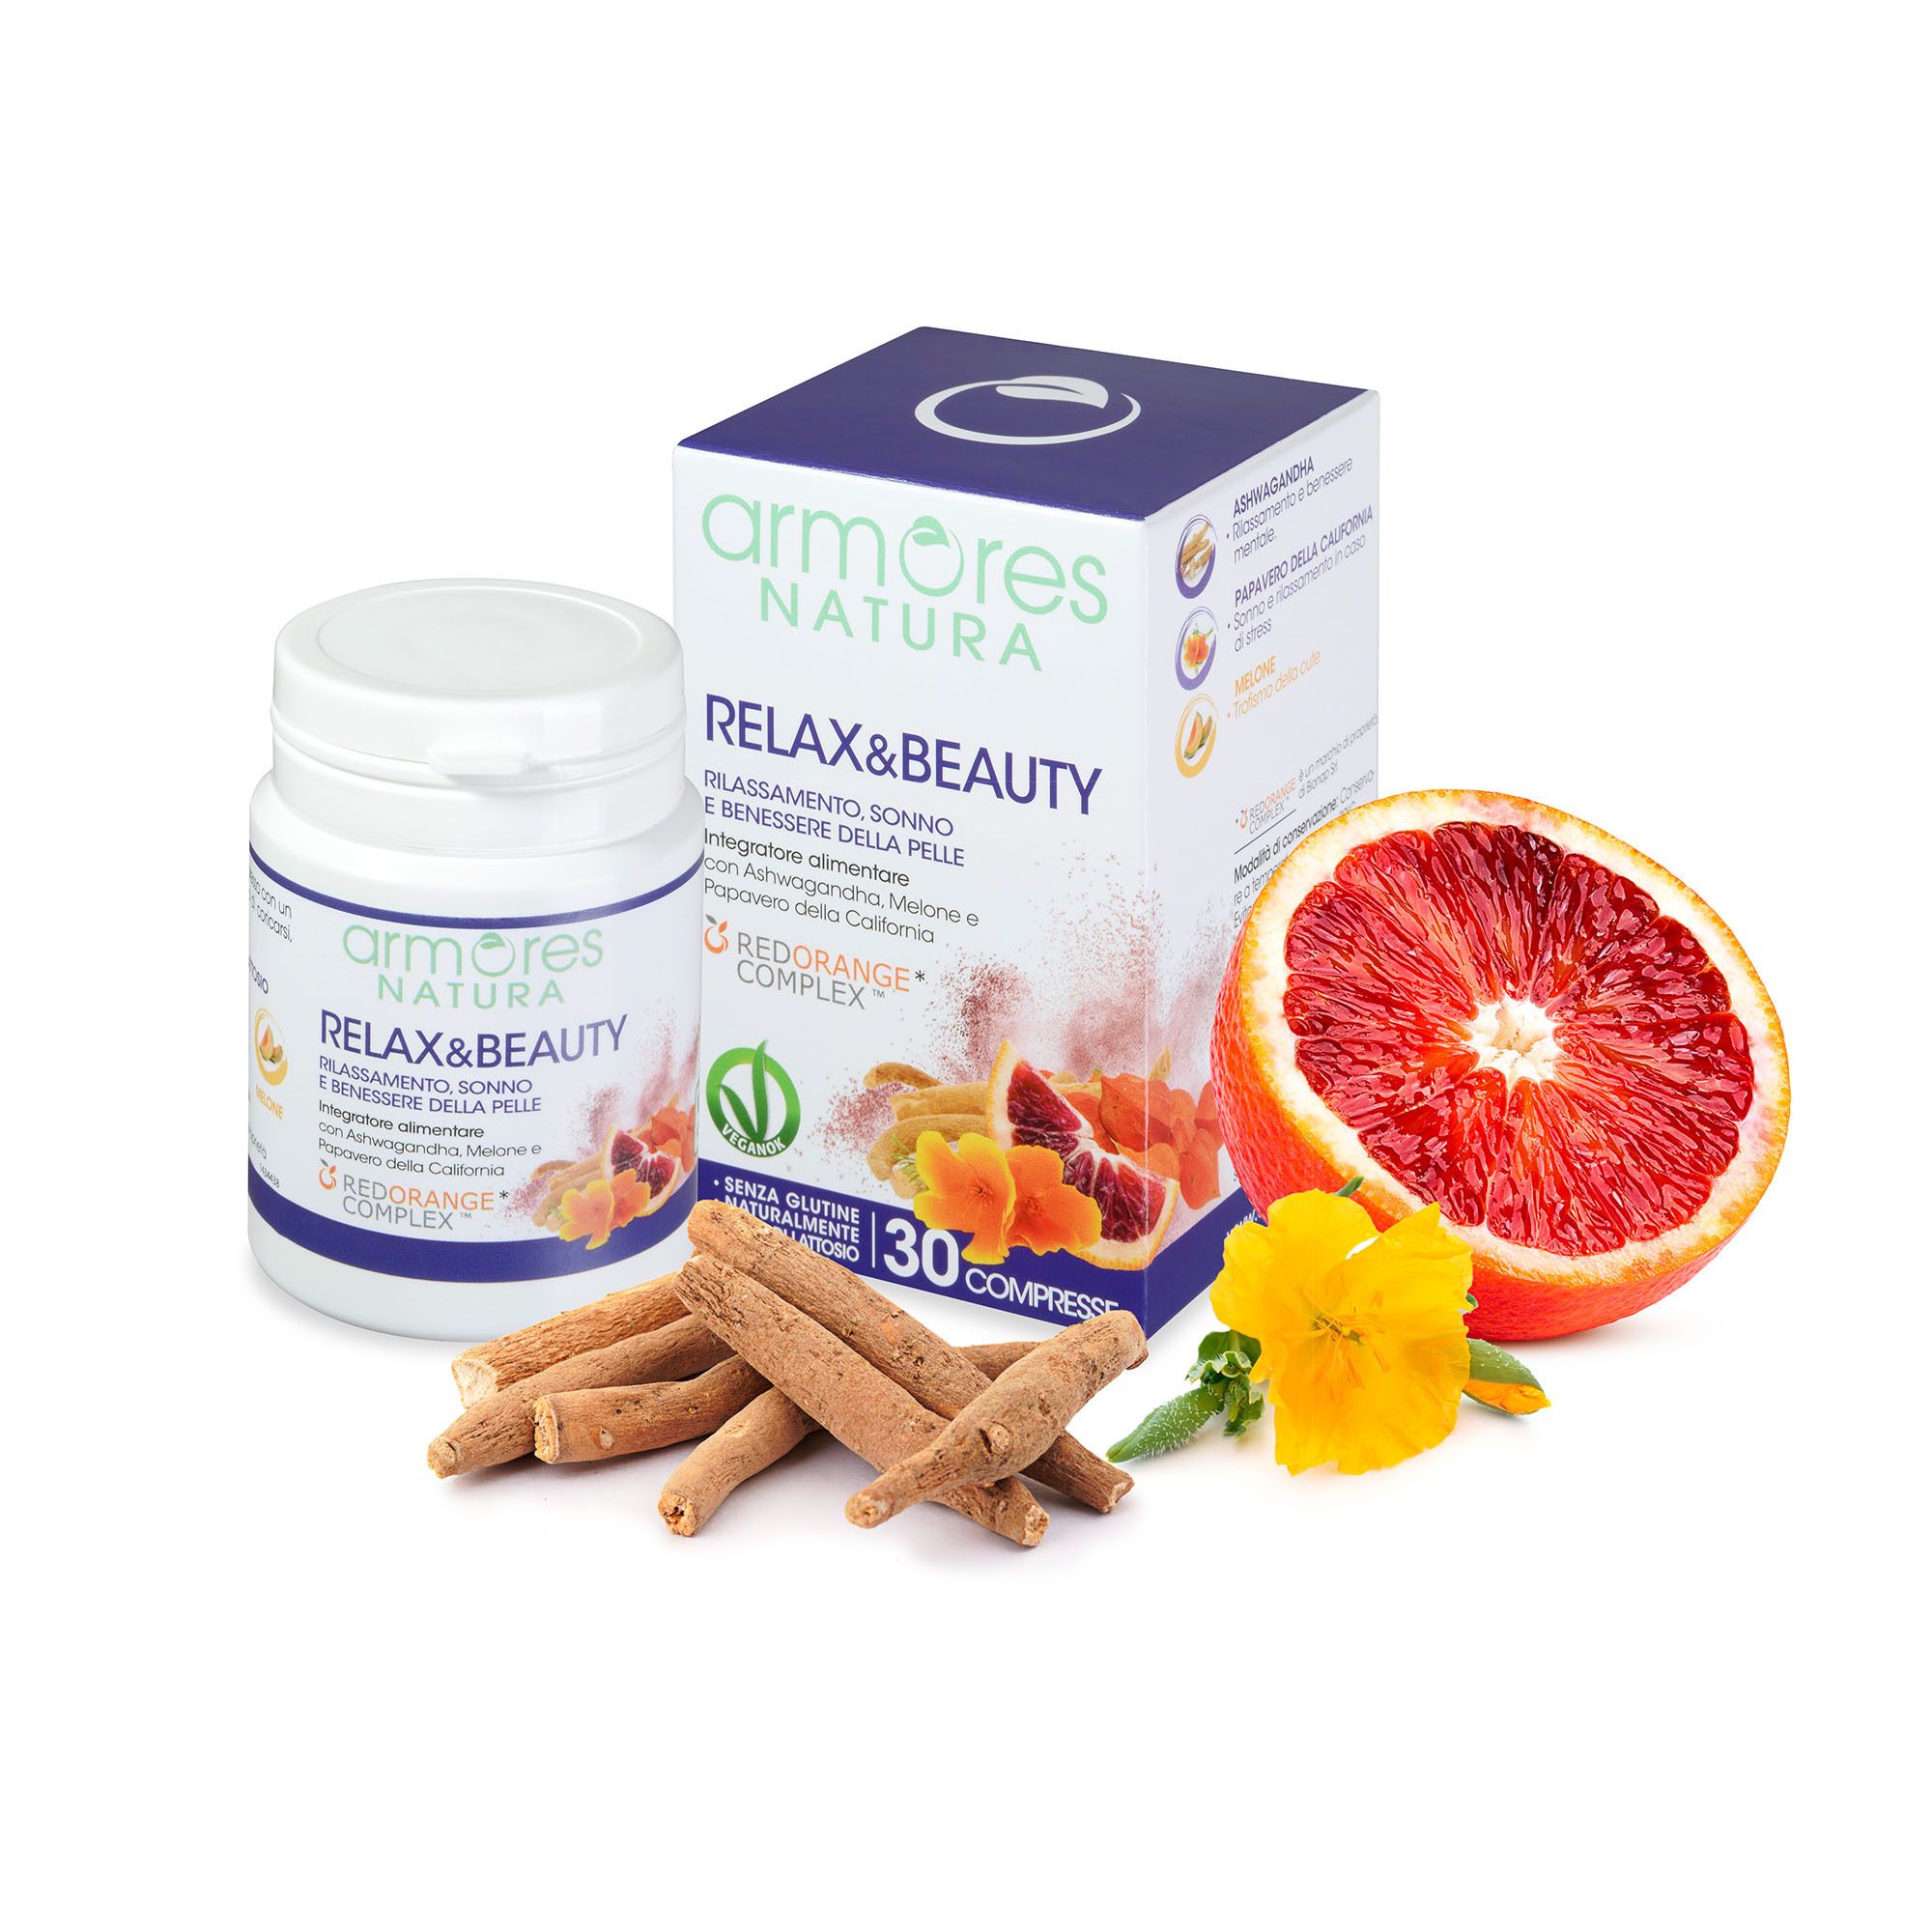 Image of Relax&Beauty integratore alimentare relax e pelle (30cpr)